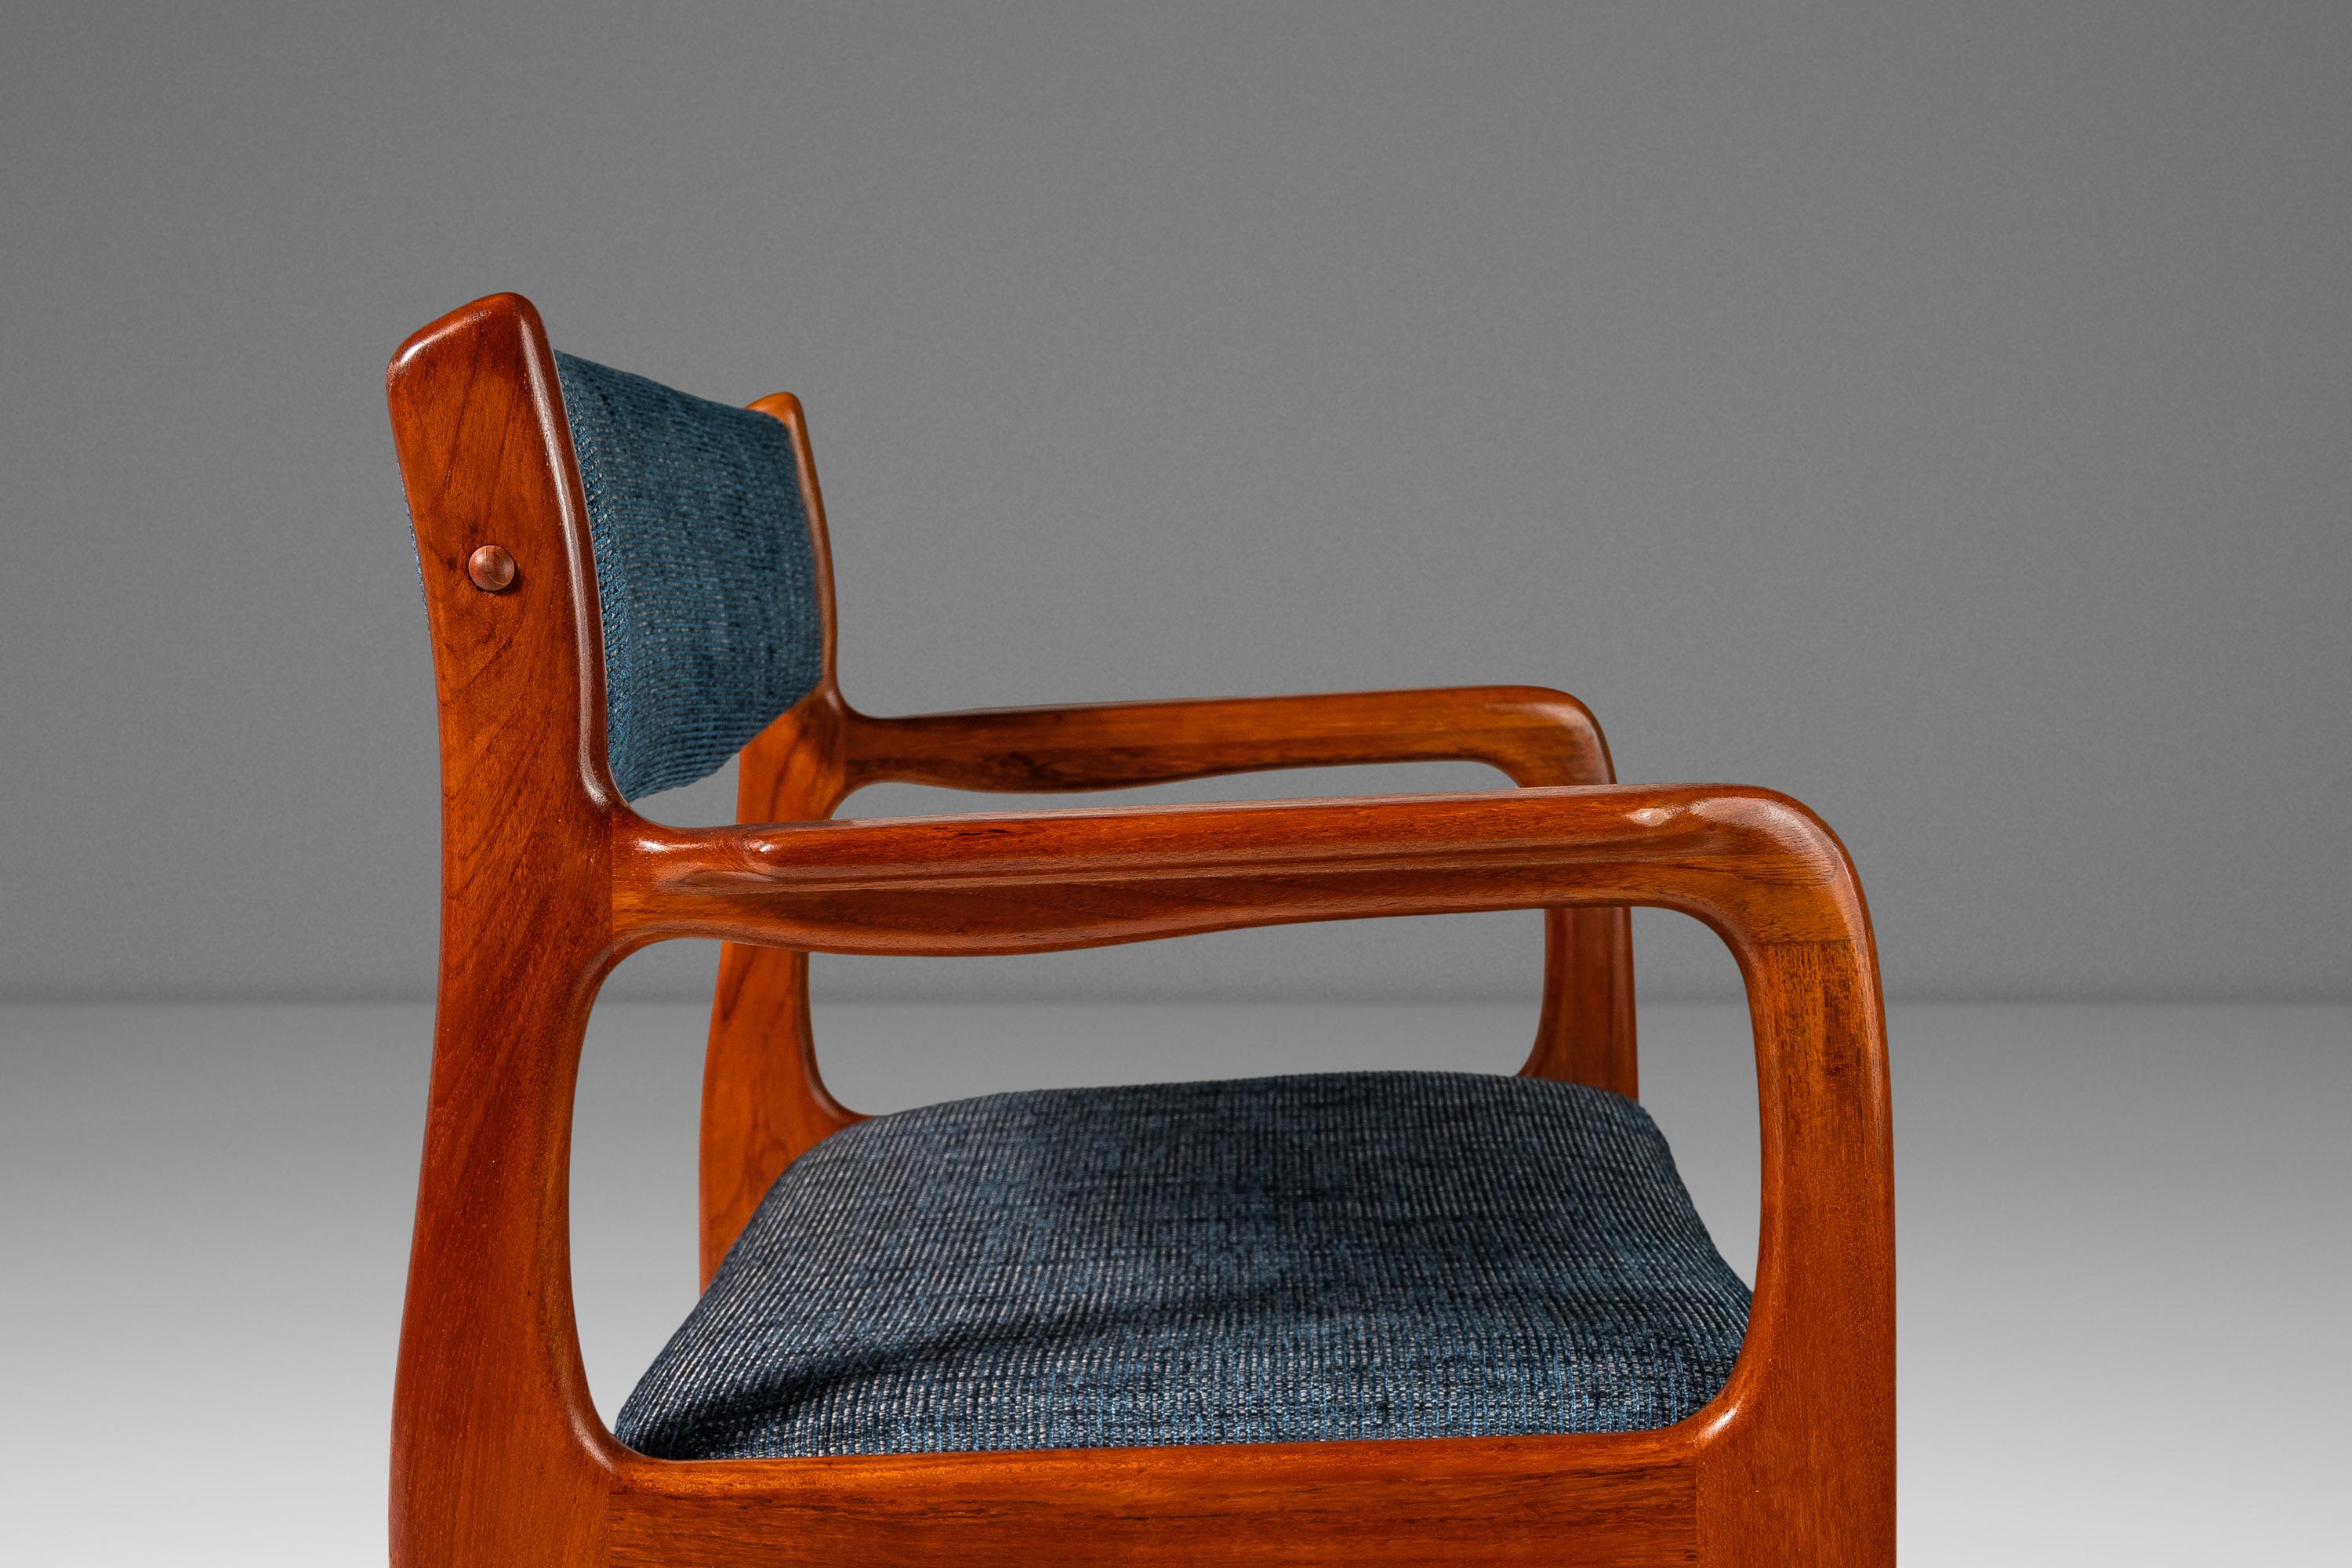 Arm Chair in Solid Teak and New Upholstery by Benny Linden Designs, c. 1970s For Sale 11